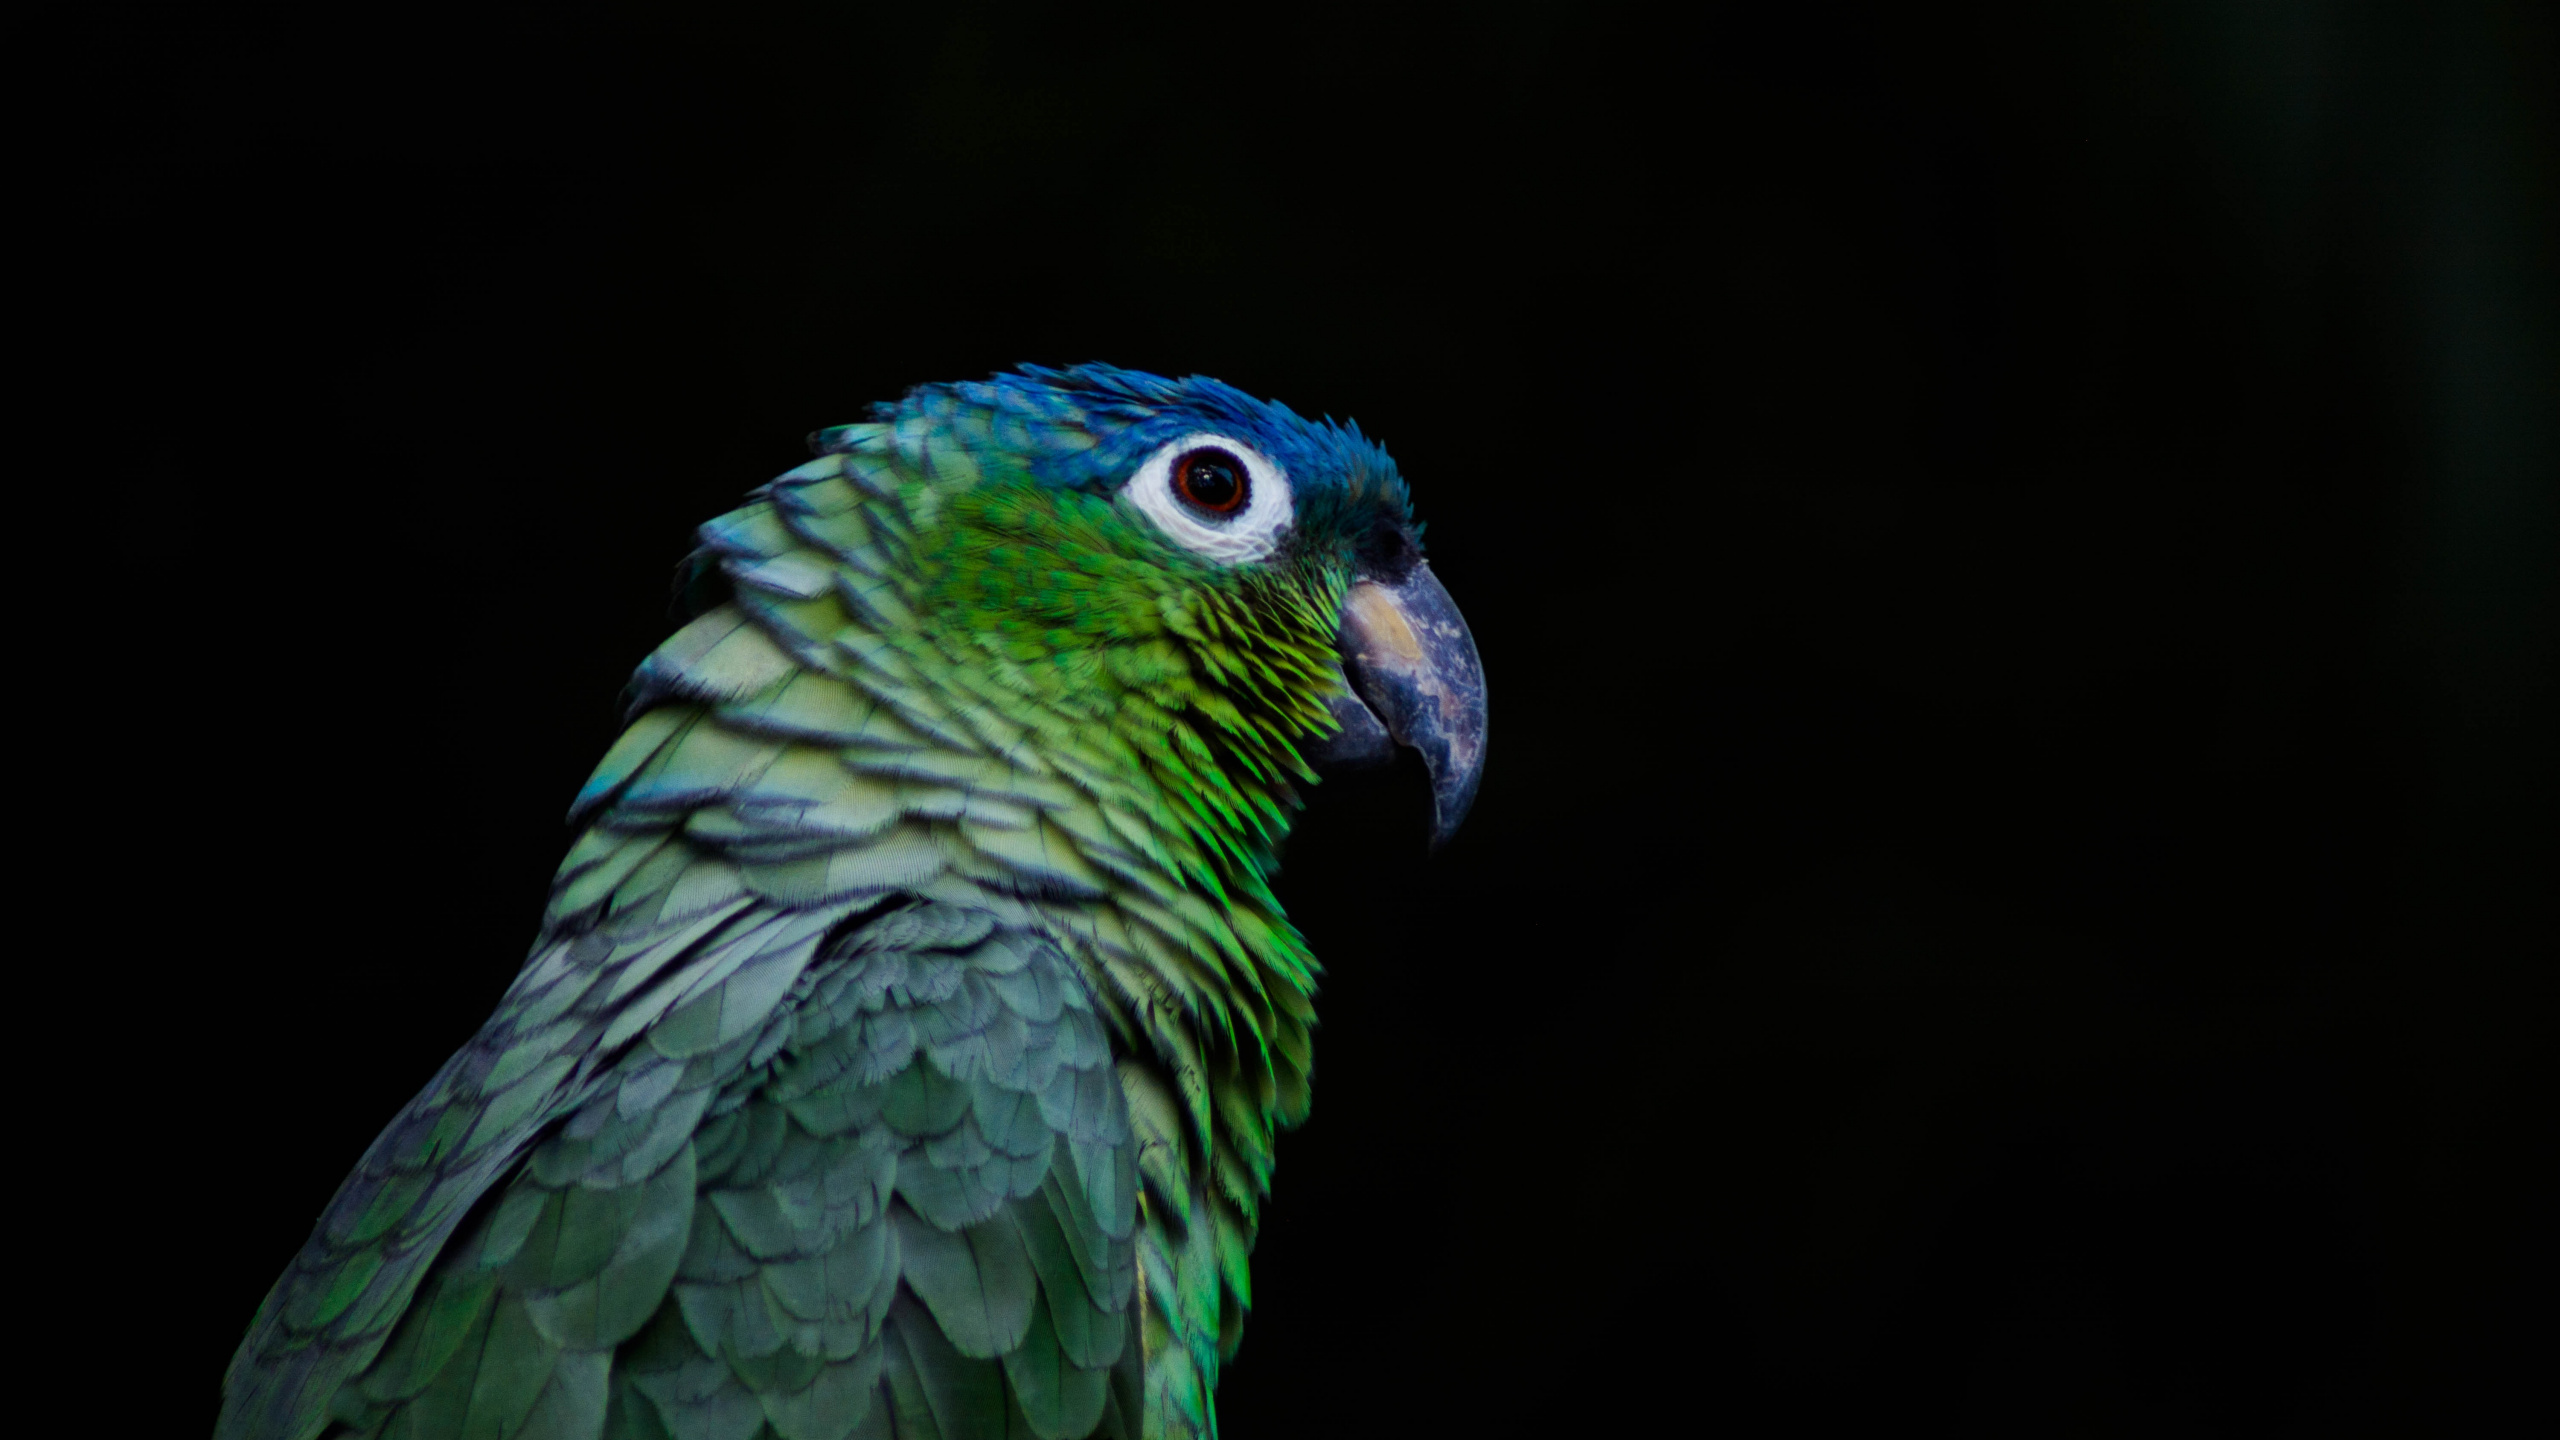 Green and Blue Parrot in Close up Photography. Wallpaper in 2560x1440 Resolution